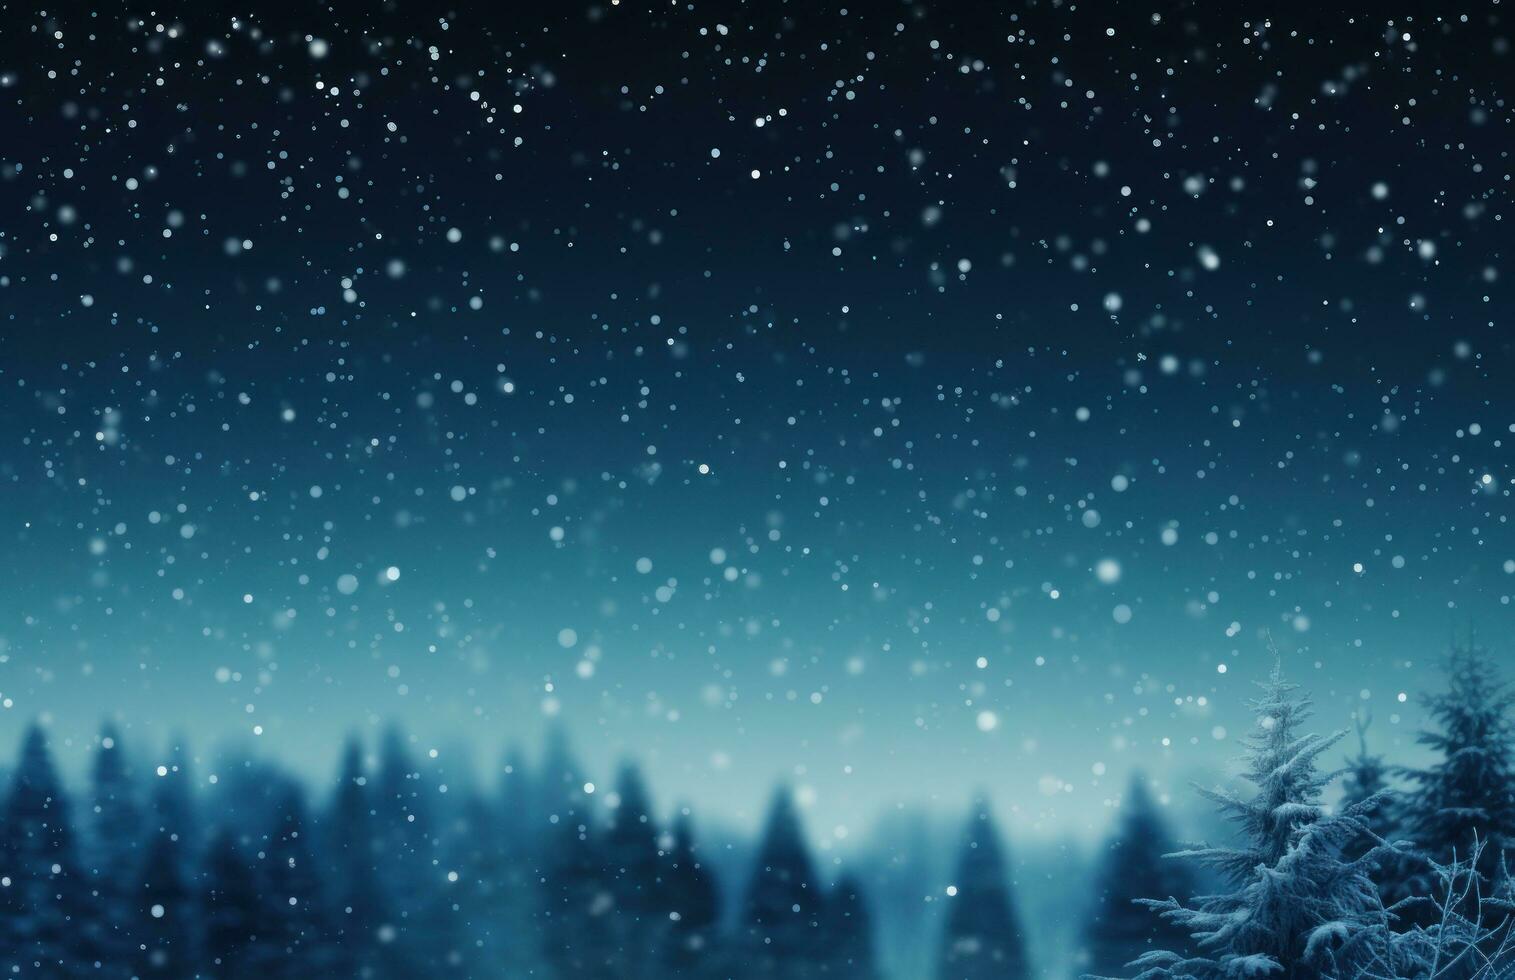 winter landscape background with snow falling photo